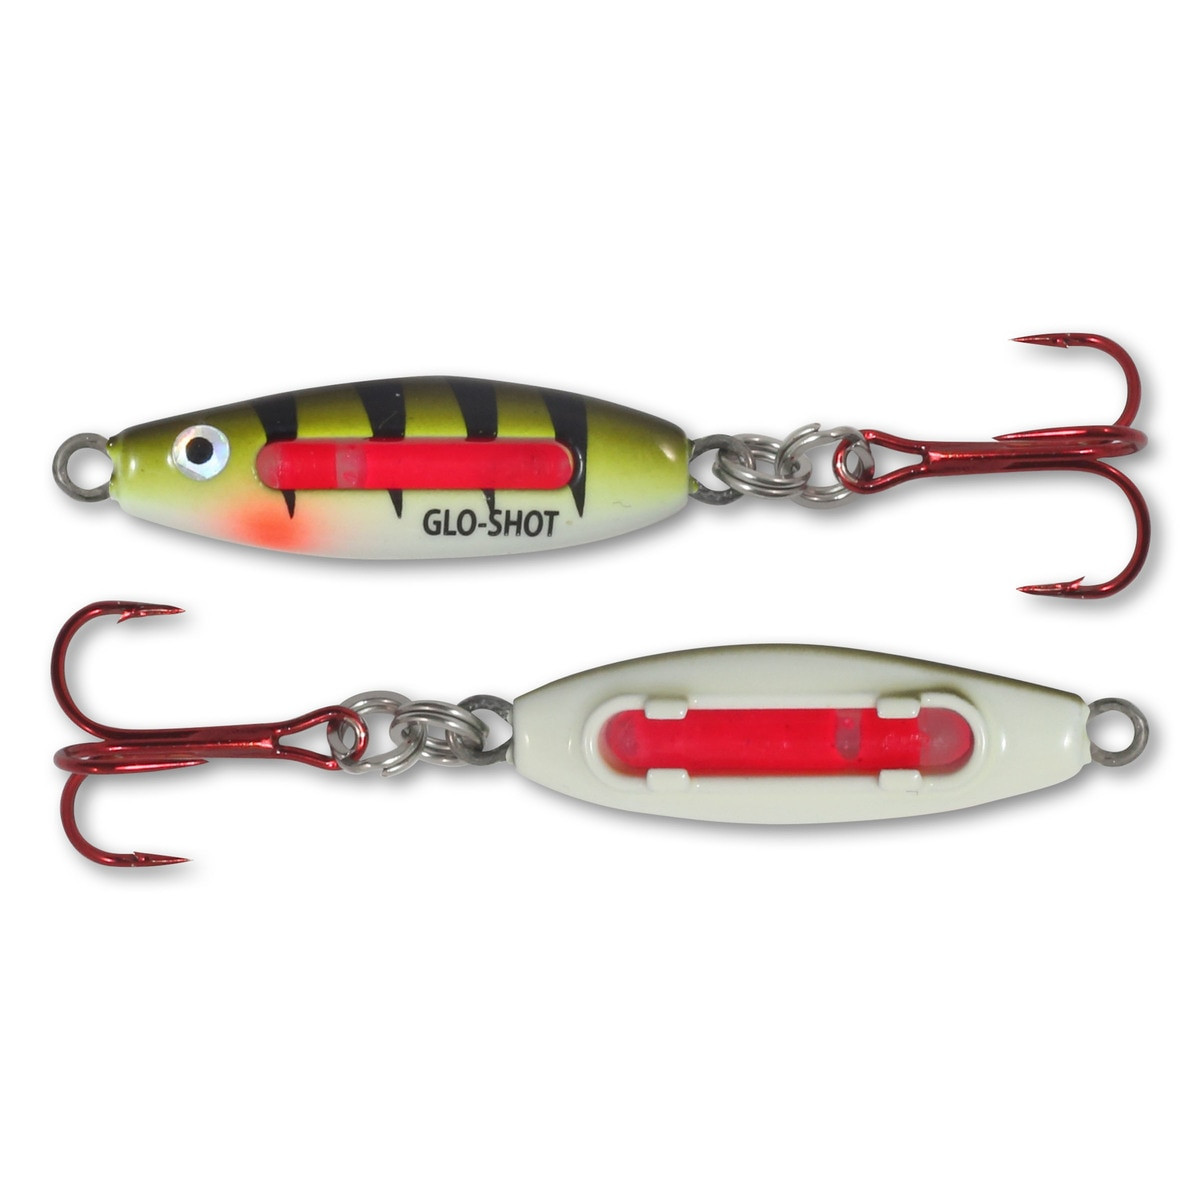 Northland Fishing Tackle - Reed-Runner® Spinnerbait - Firetiger